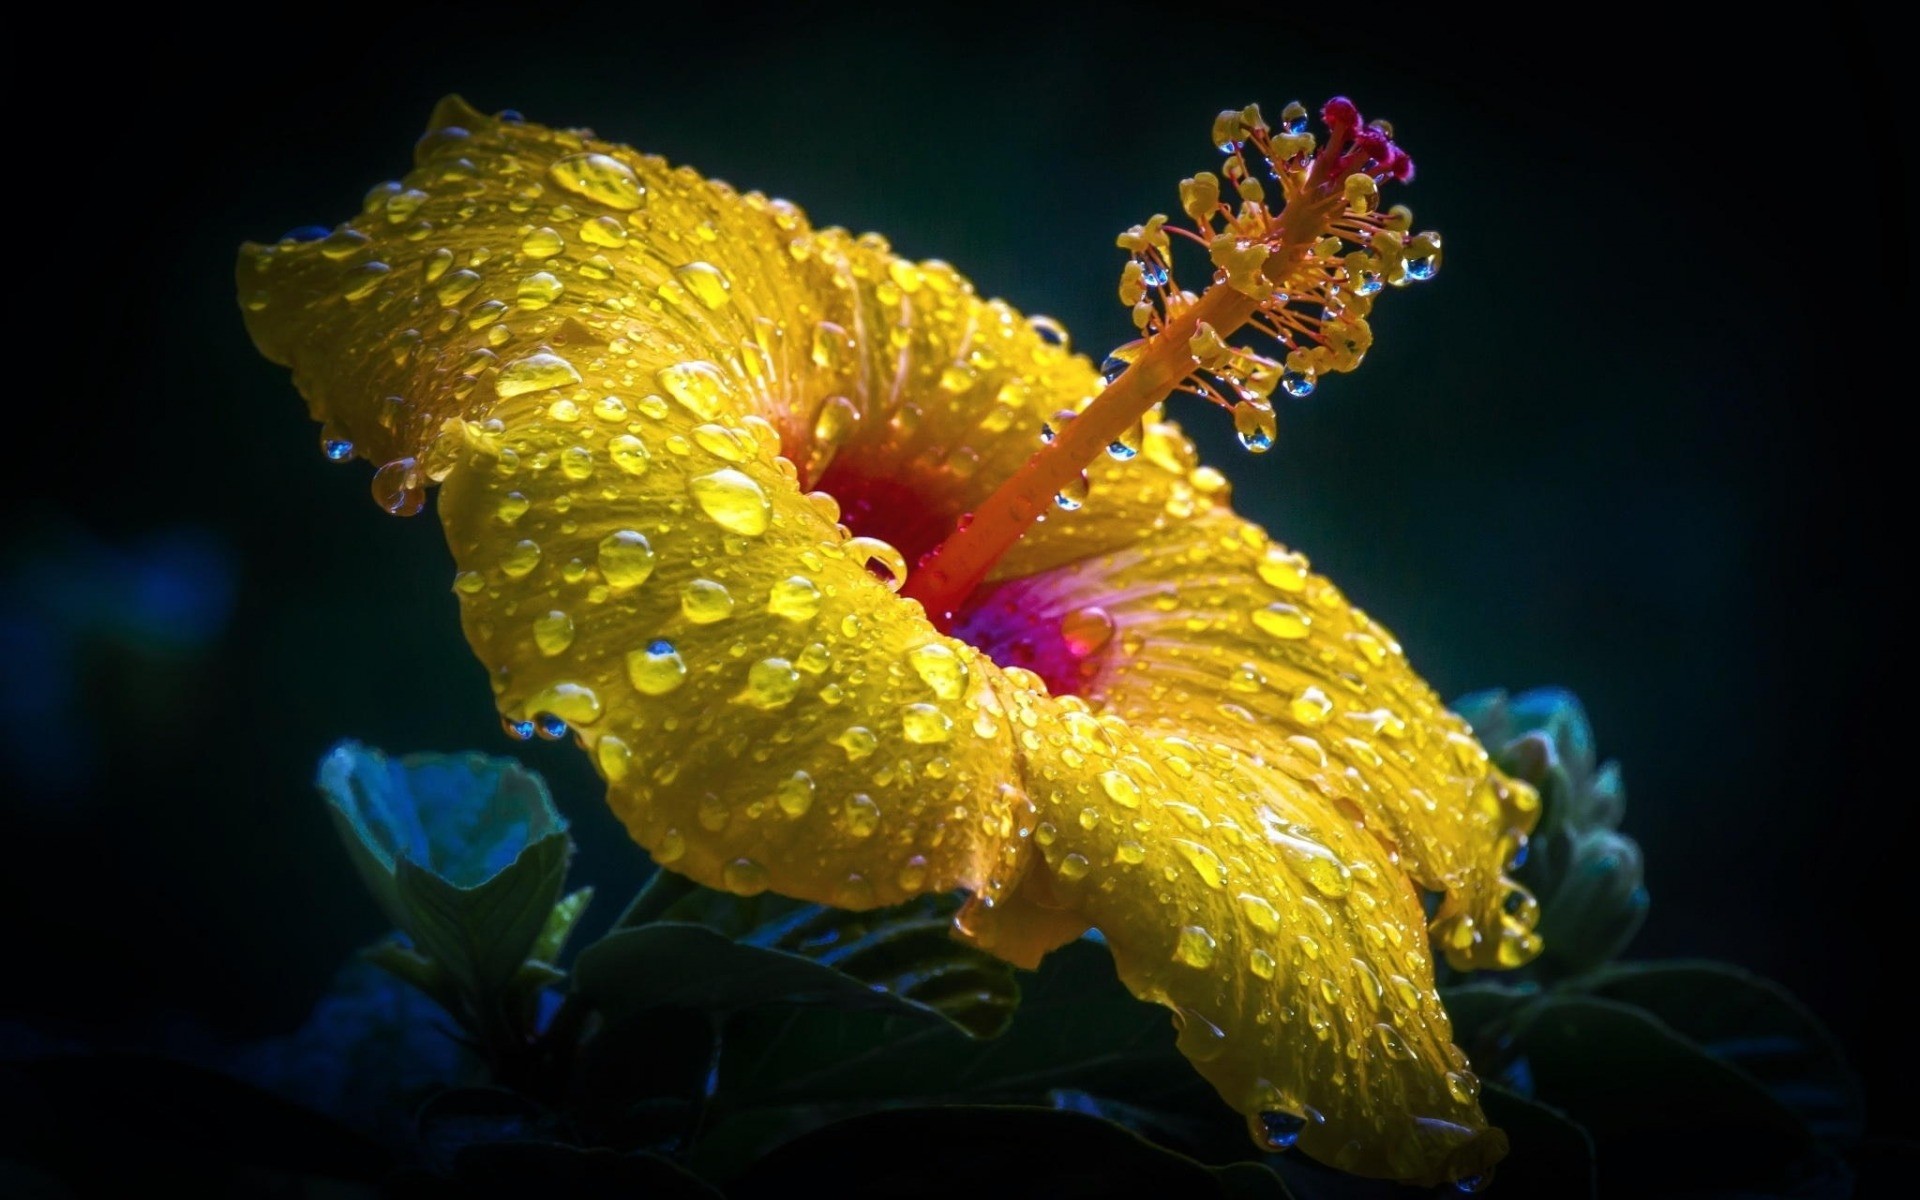 hibiscus, flowers, earth, close up, flower, water drop, yellow flower 2160p